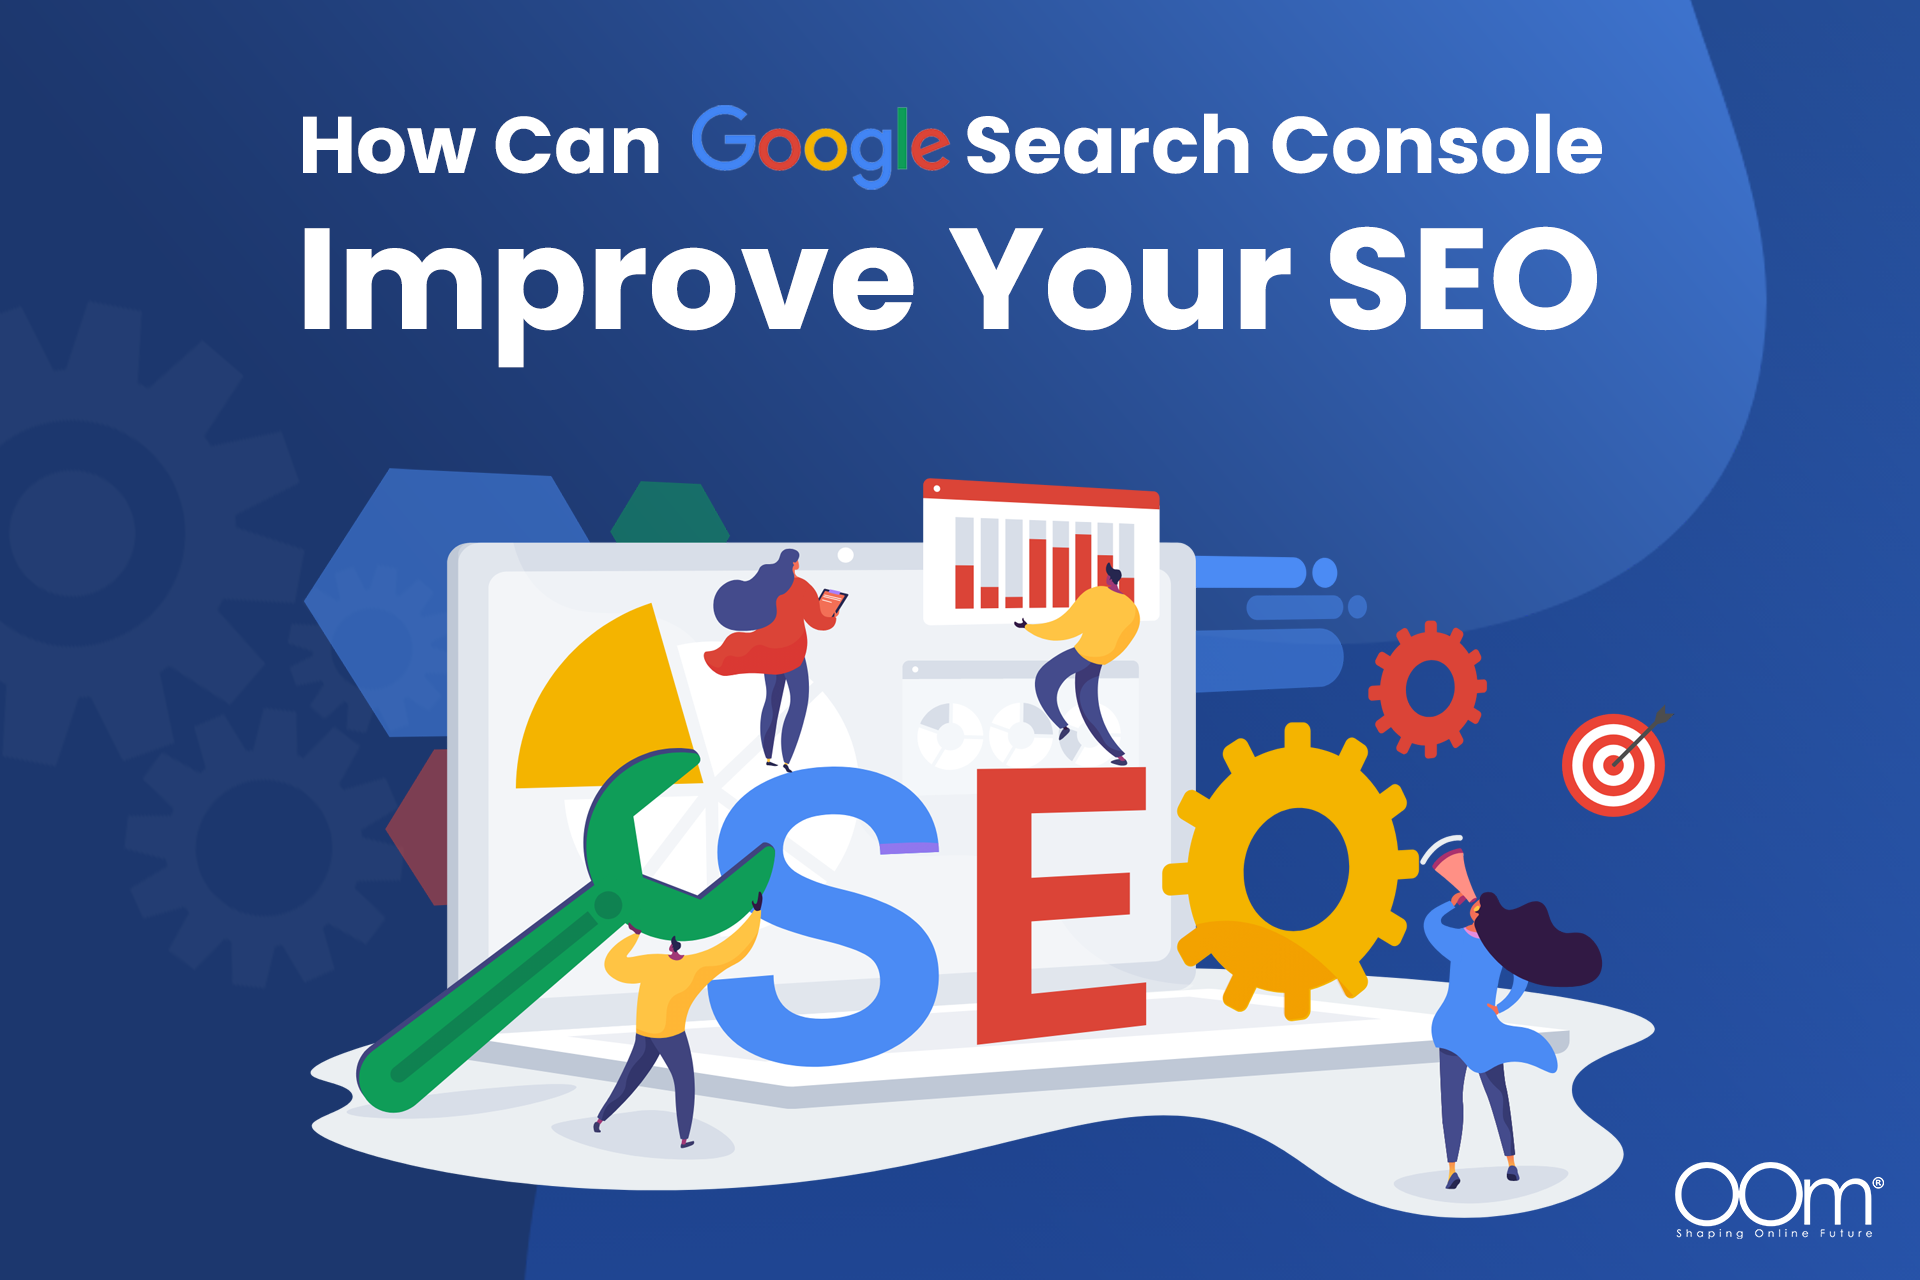 How Can Google Search Console Improve Your SEO